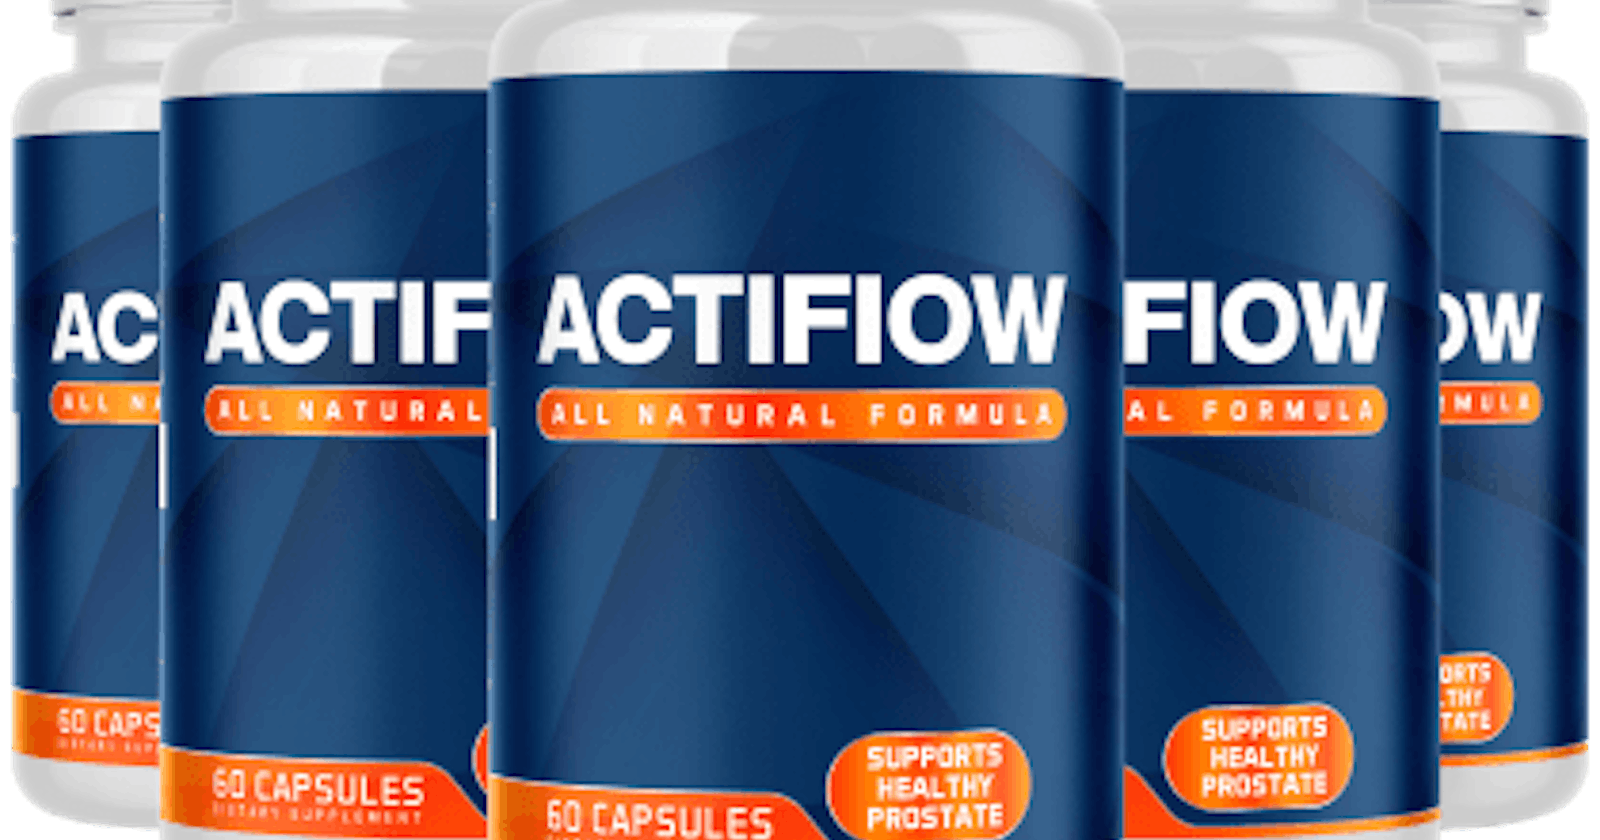 Actiflow Prostate Formula (#1 Clinical Proven Prostate Formula) FDA Approved Or Hoax?